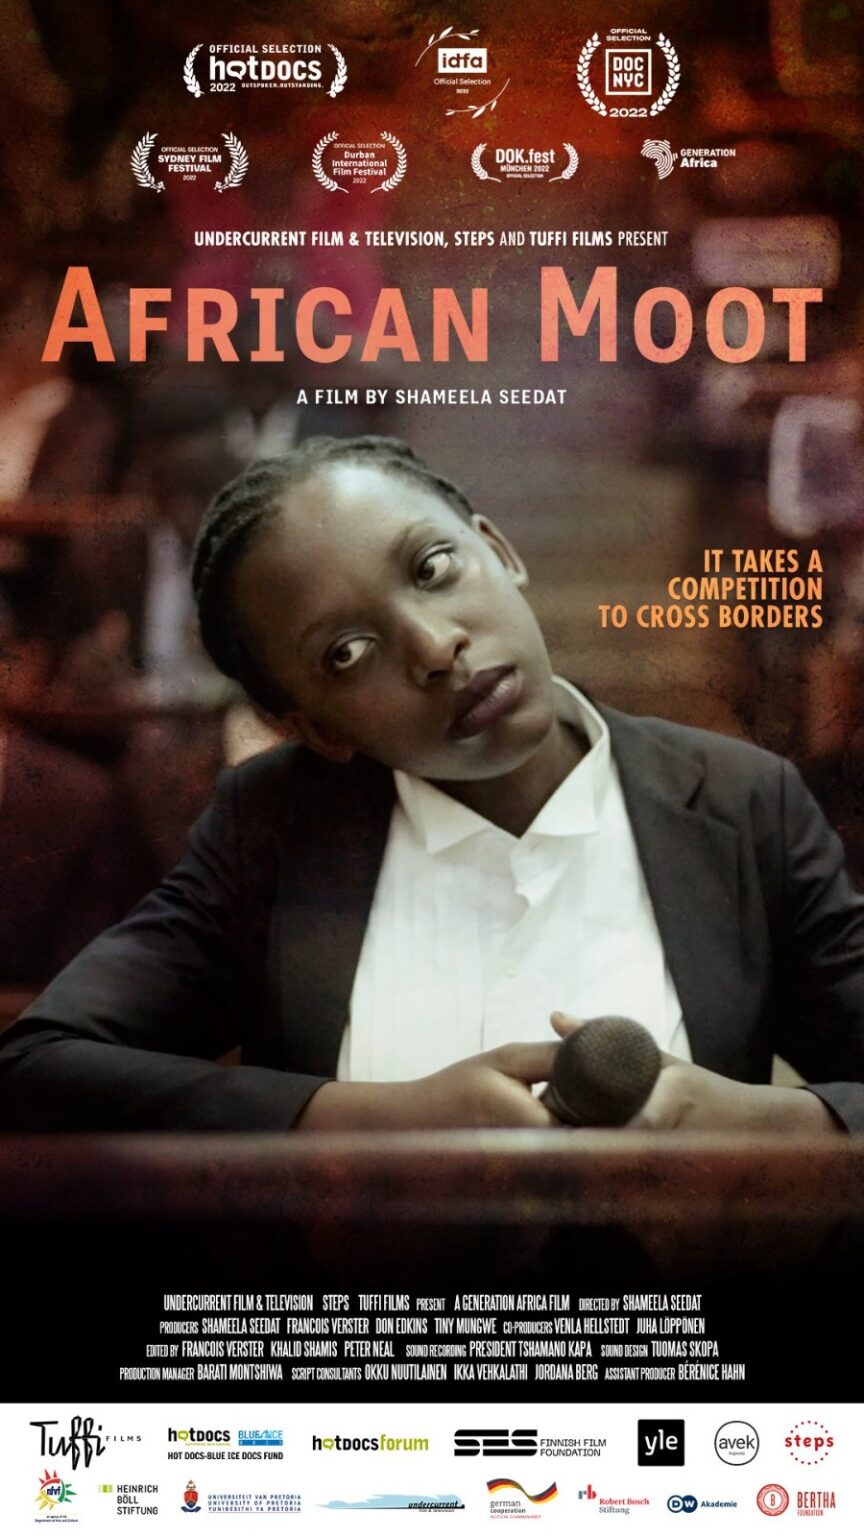 African Moot Film by Shameela Seedat is based on LLB students arguing for and against human rights issues for refugees across Africa. Photo: Sourced